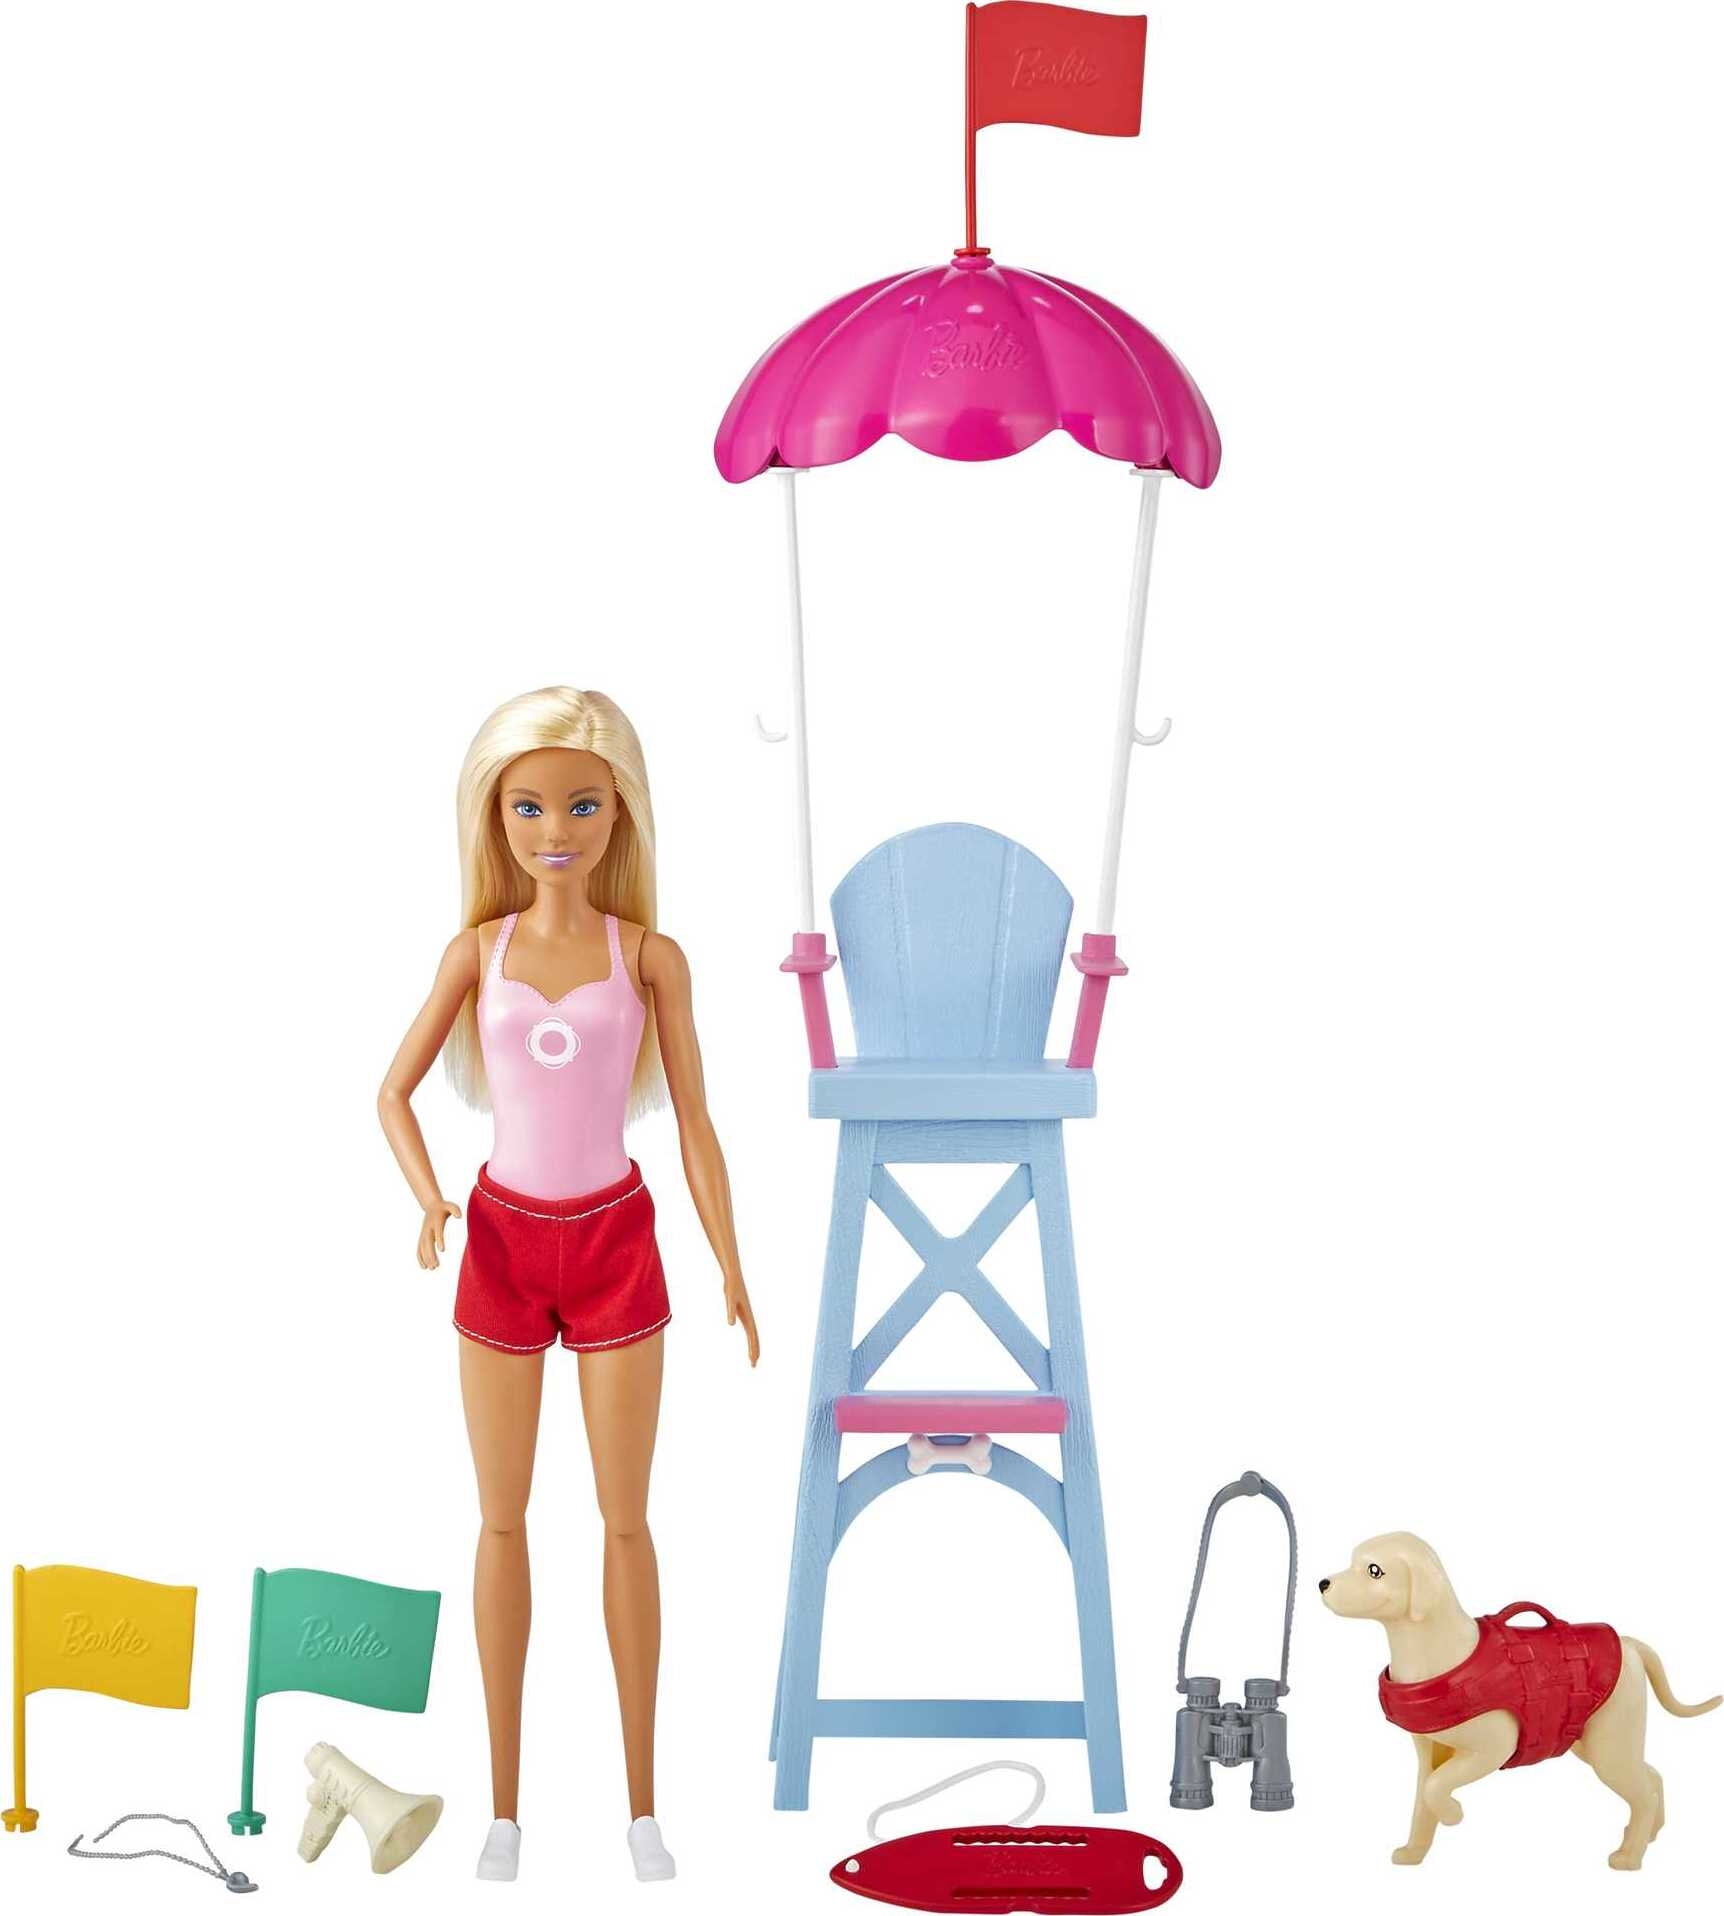 Barbie Careers Lifeguard Fashion Outfit with Accessory For Doll Toy FXH97 